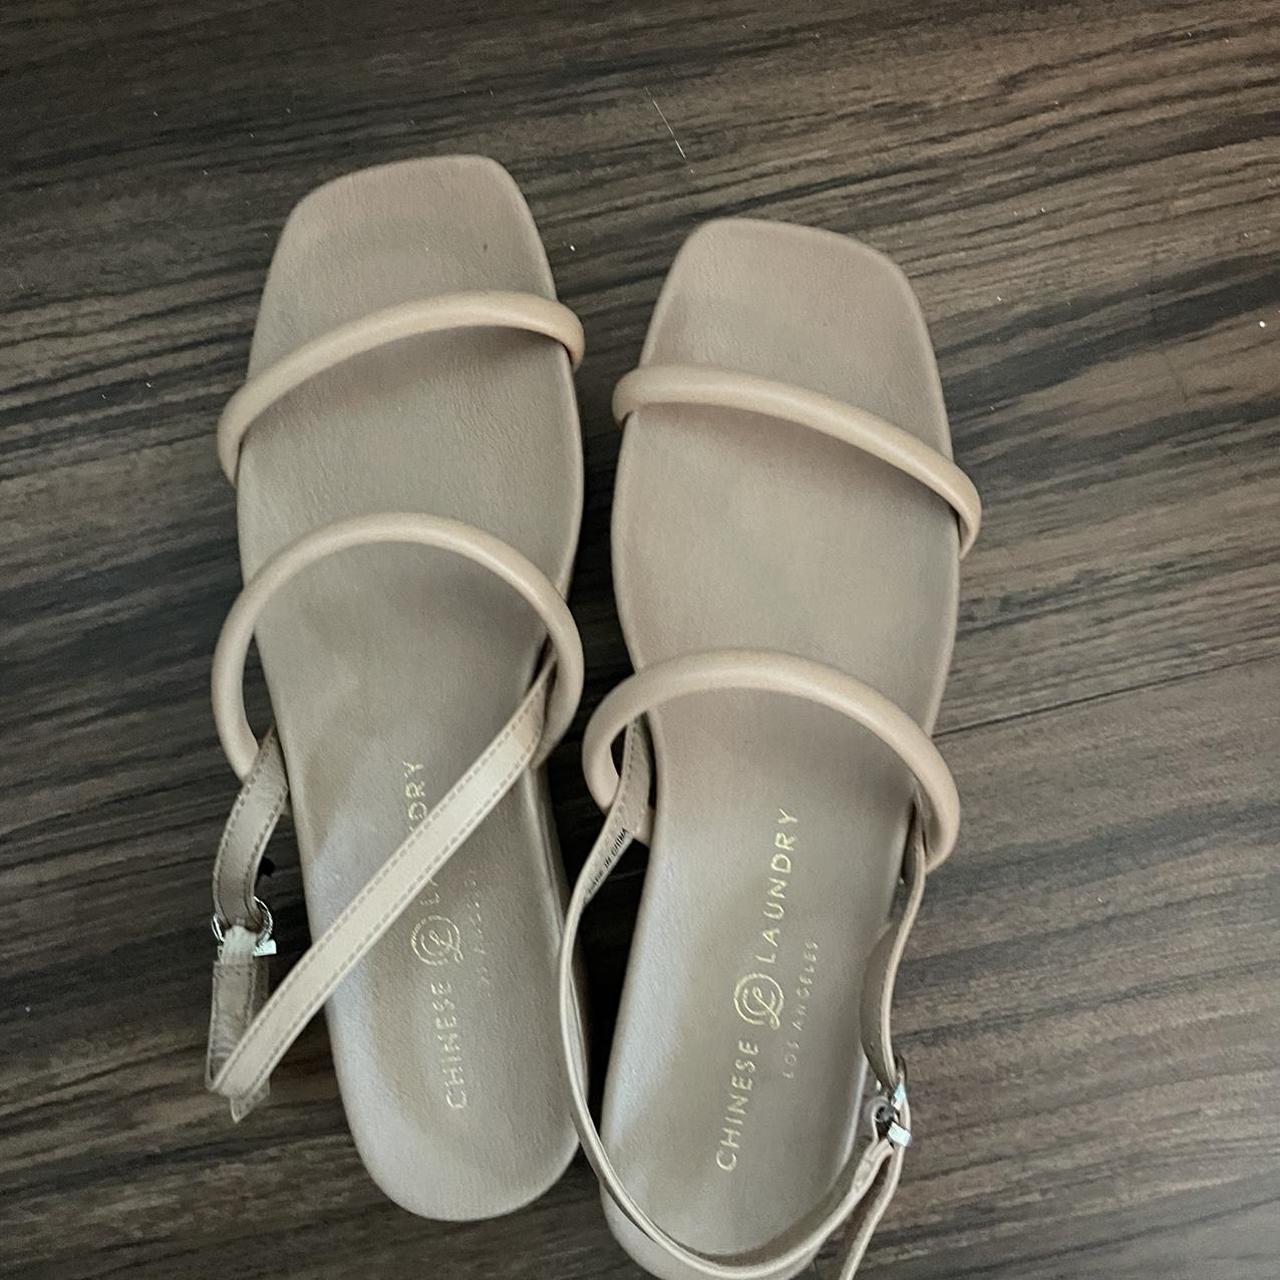 Chinese Laundry Women's Sandals | Depop